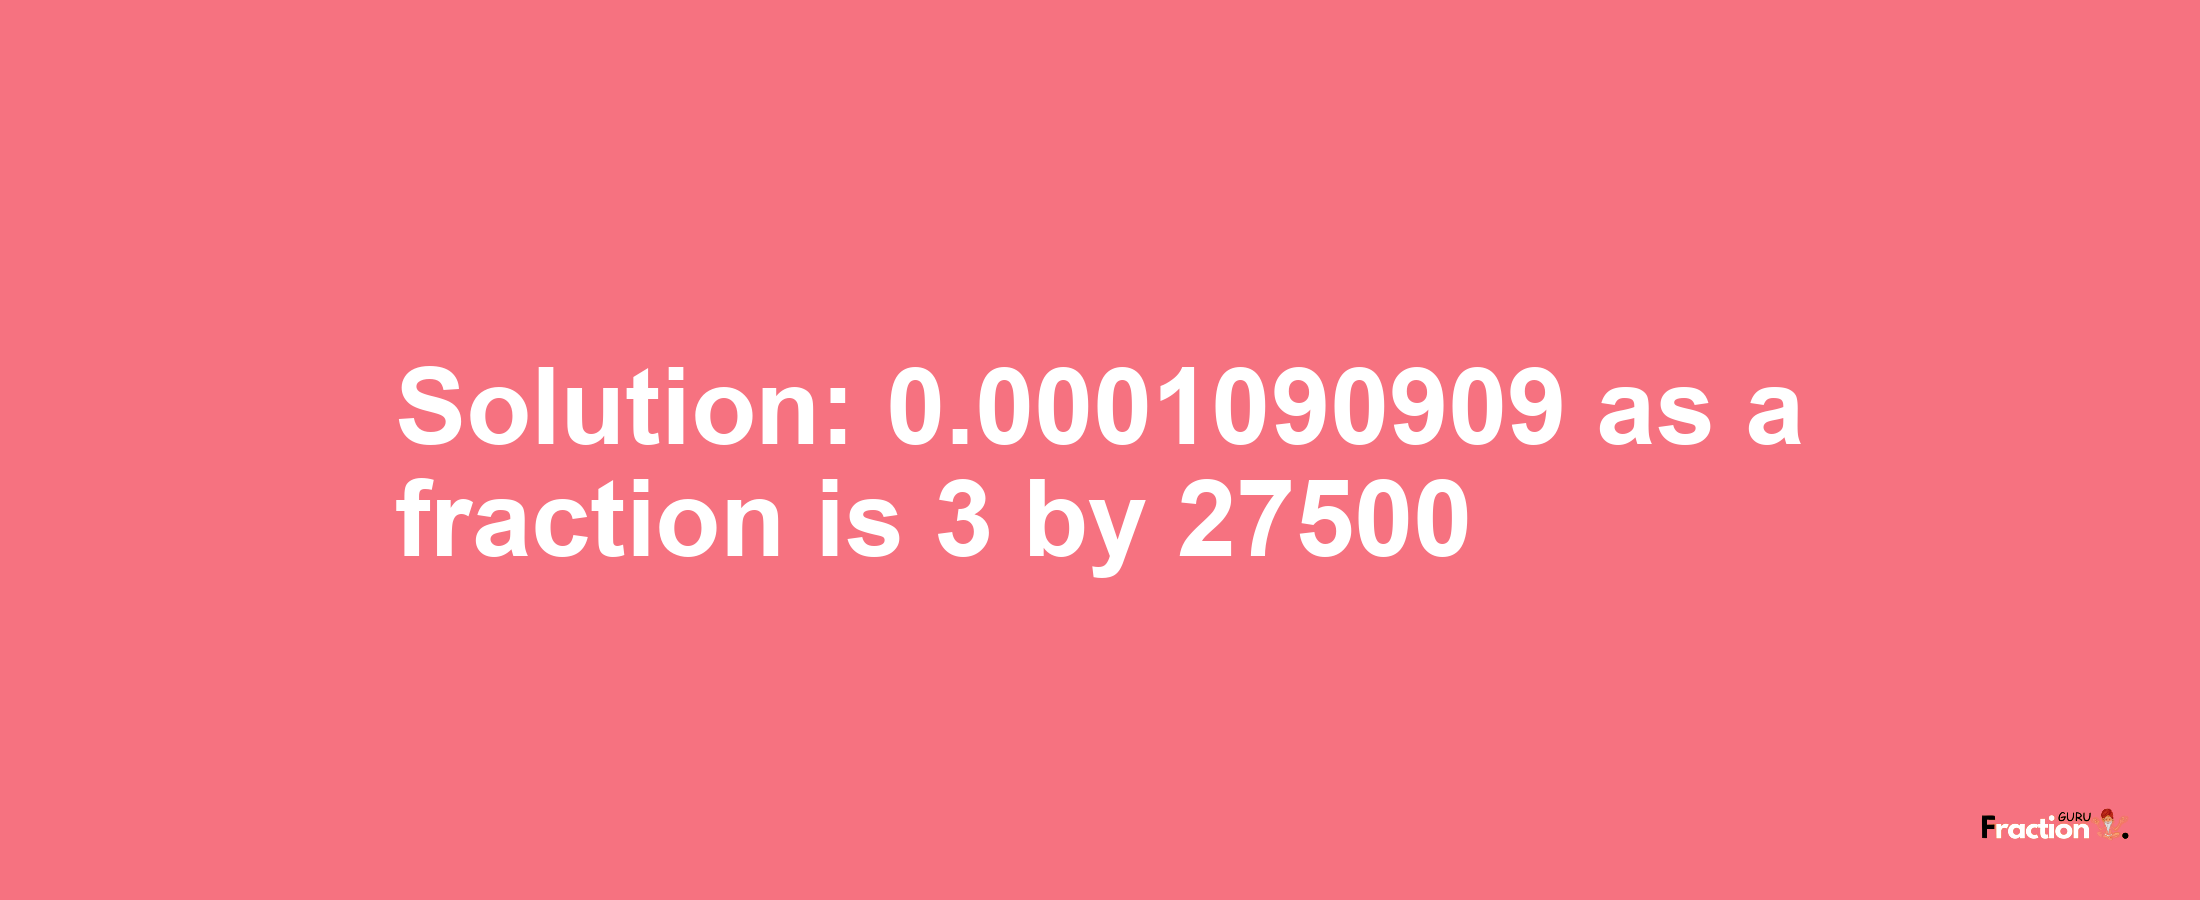 Solution:0.0001090909 as a fraction is 3/27500